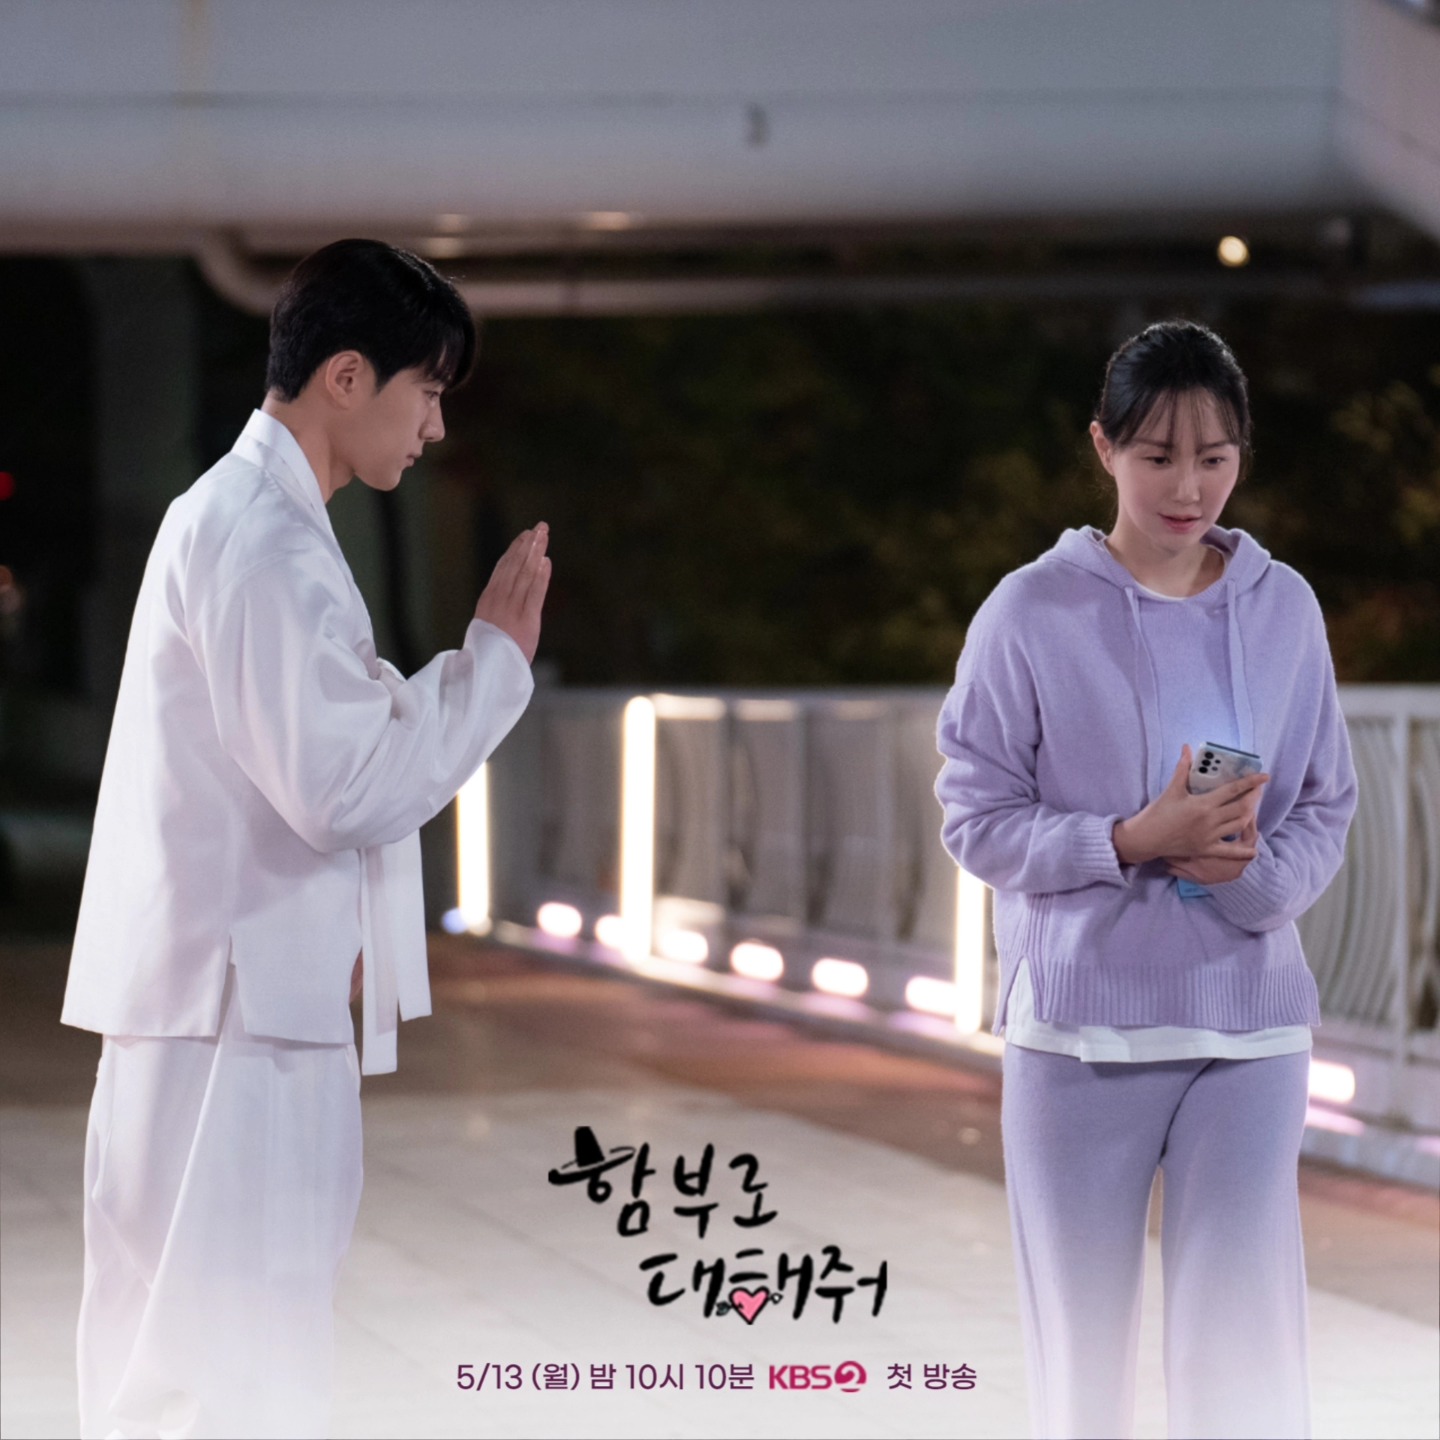 Kim Myung Soo And Lee Yoo Young Are Close Yet Distant In Upcoming Rom-Com “Dare To Love Me”